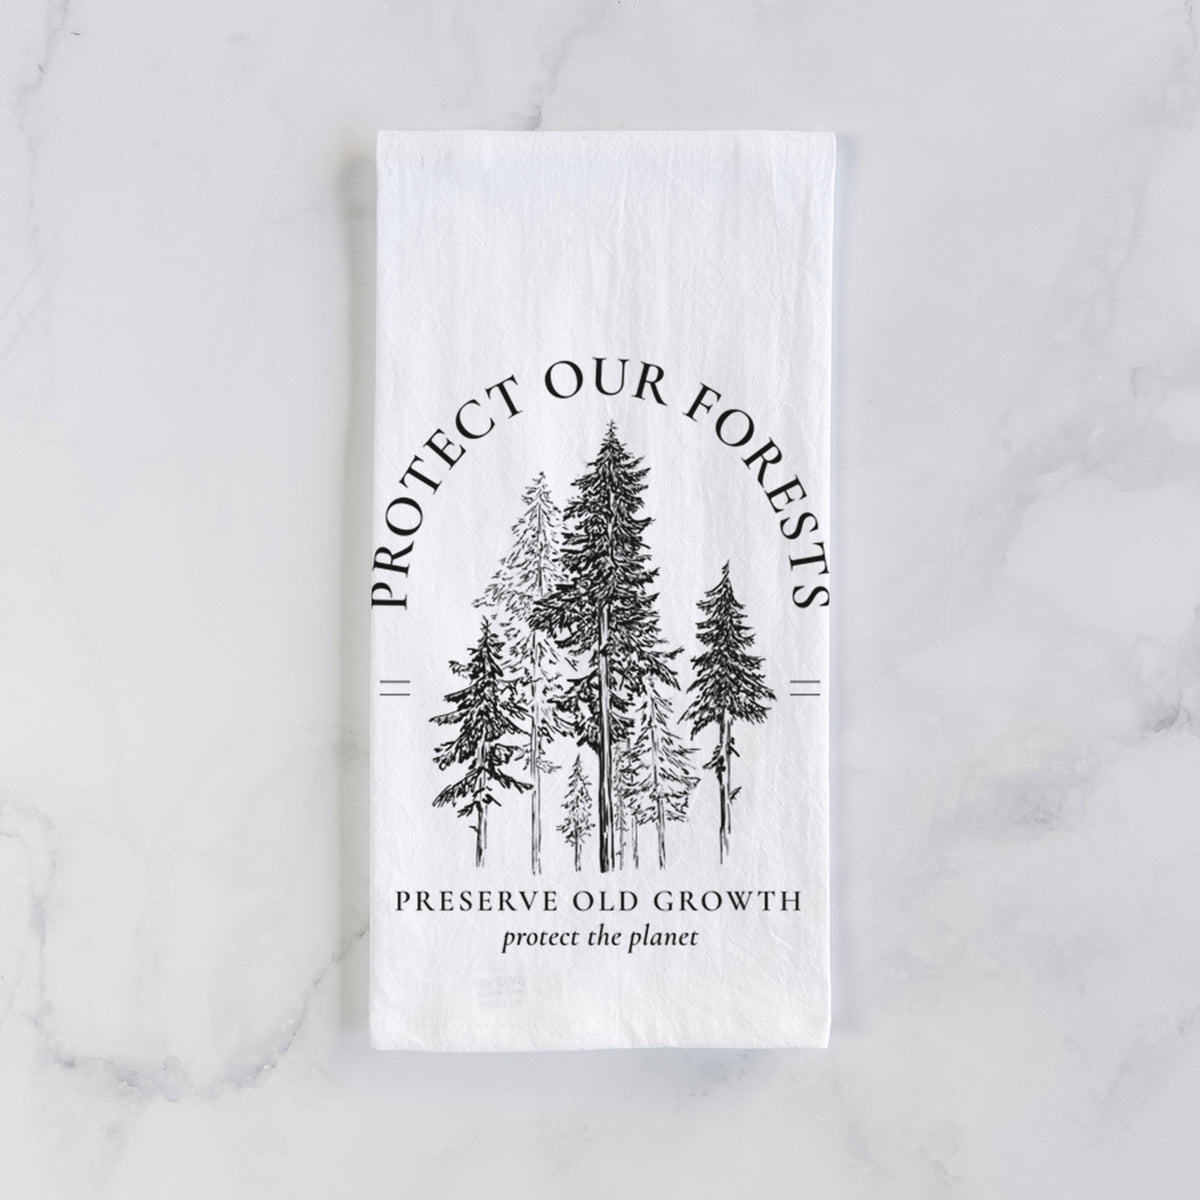 Protect our Forests - Preserve Old Growth Tea Towel